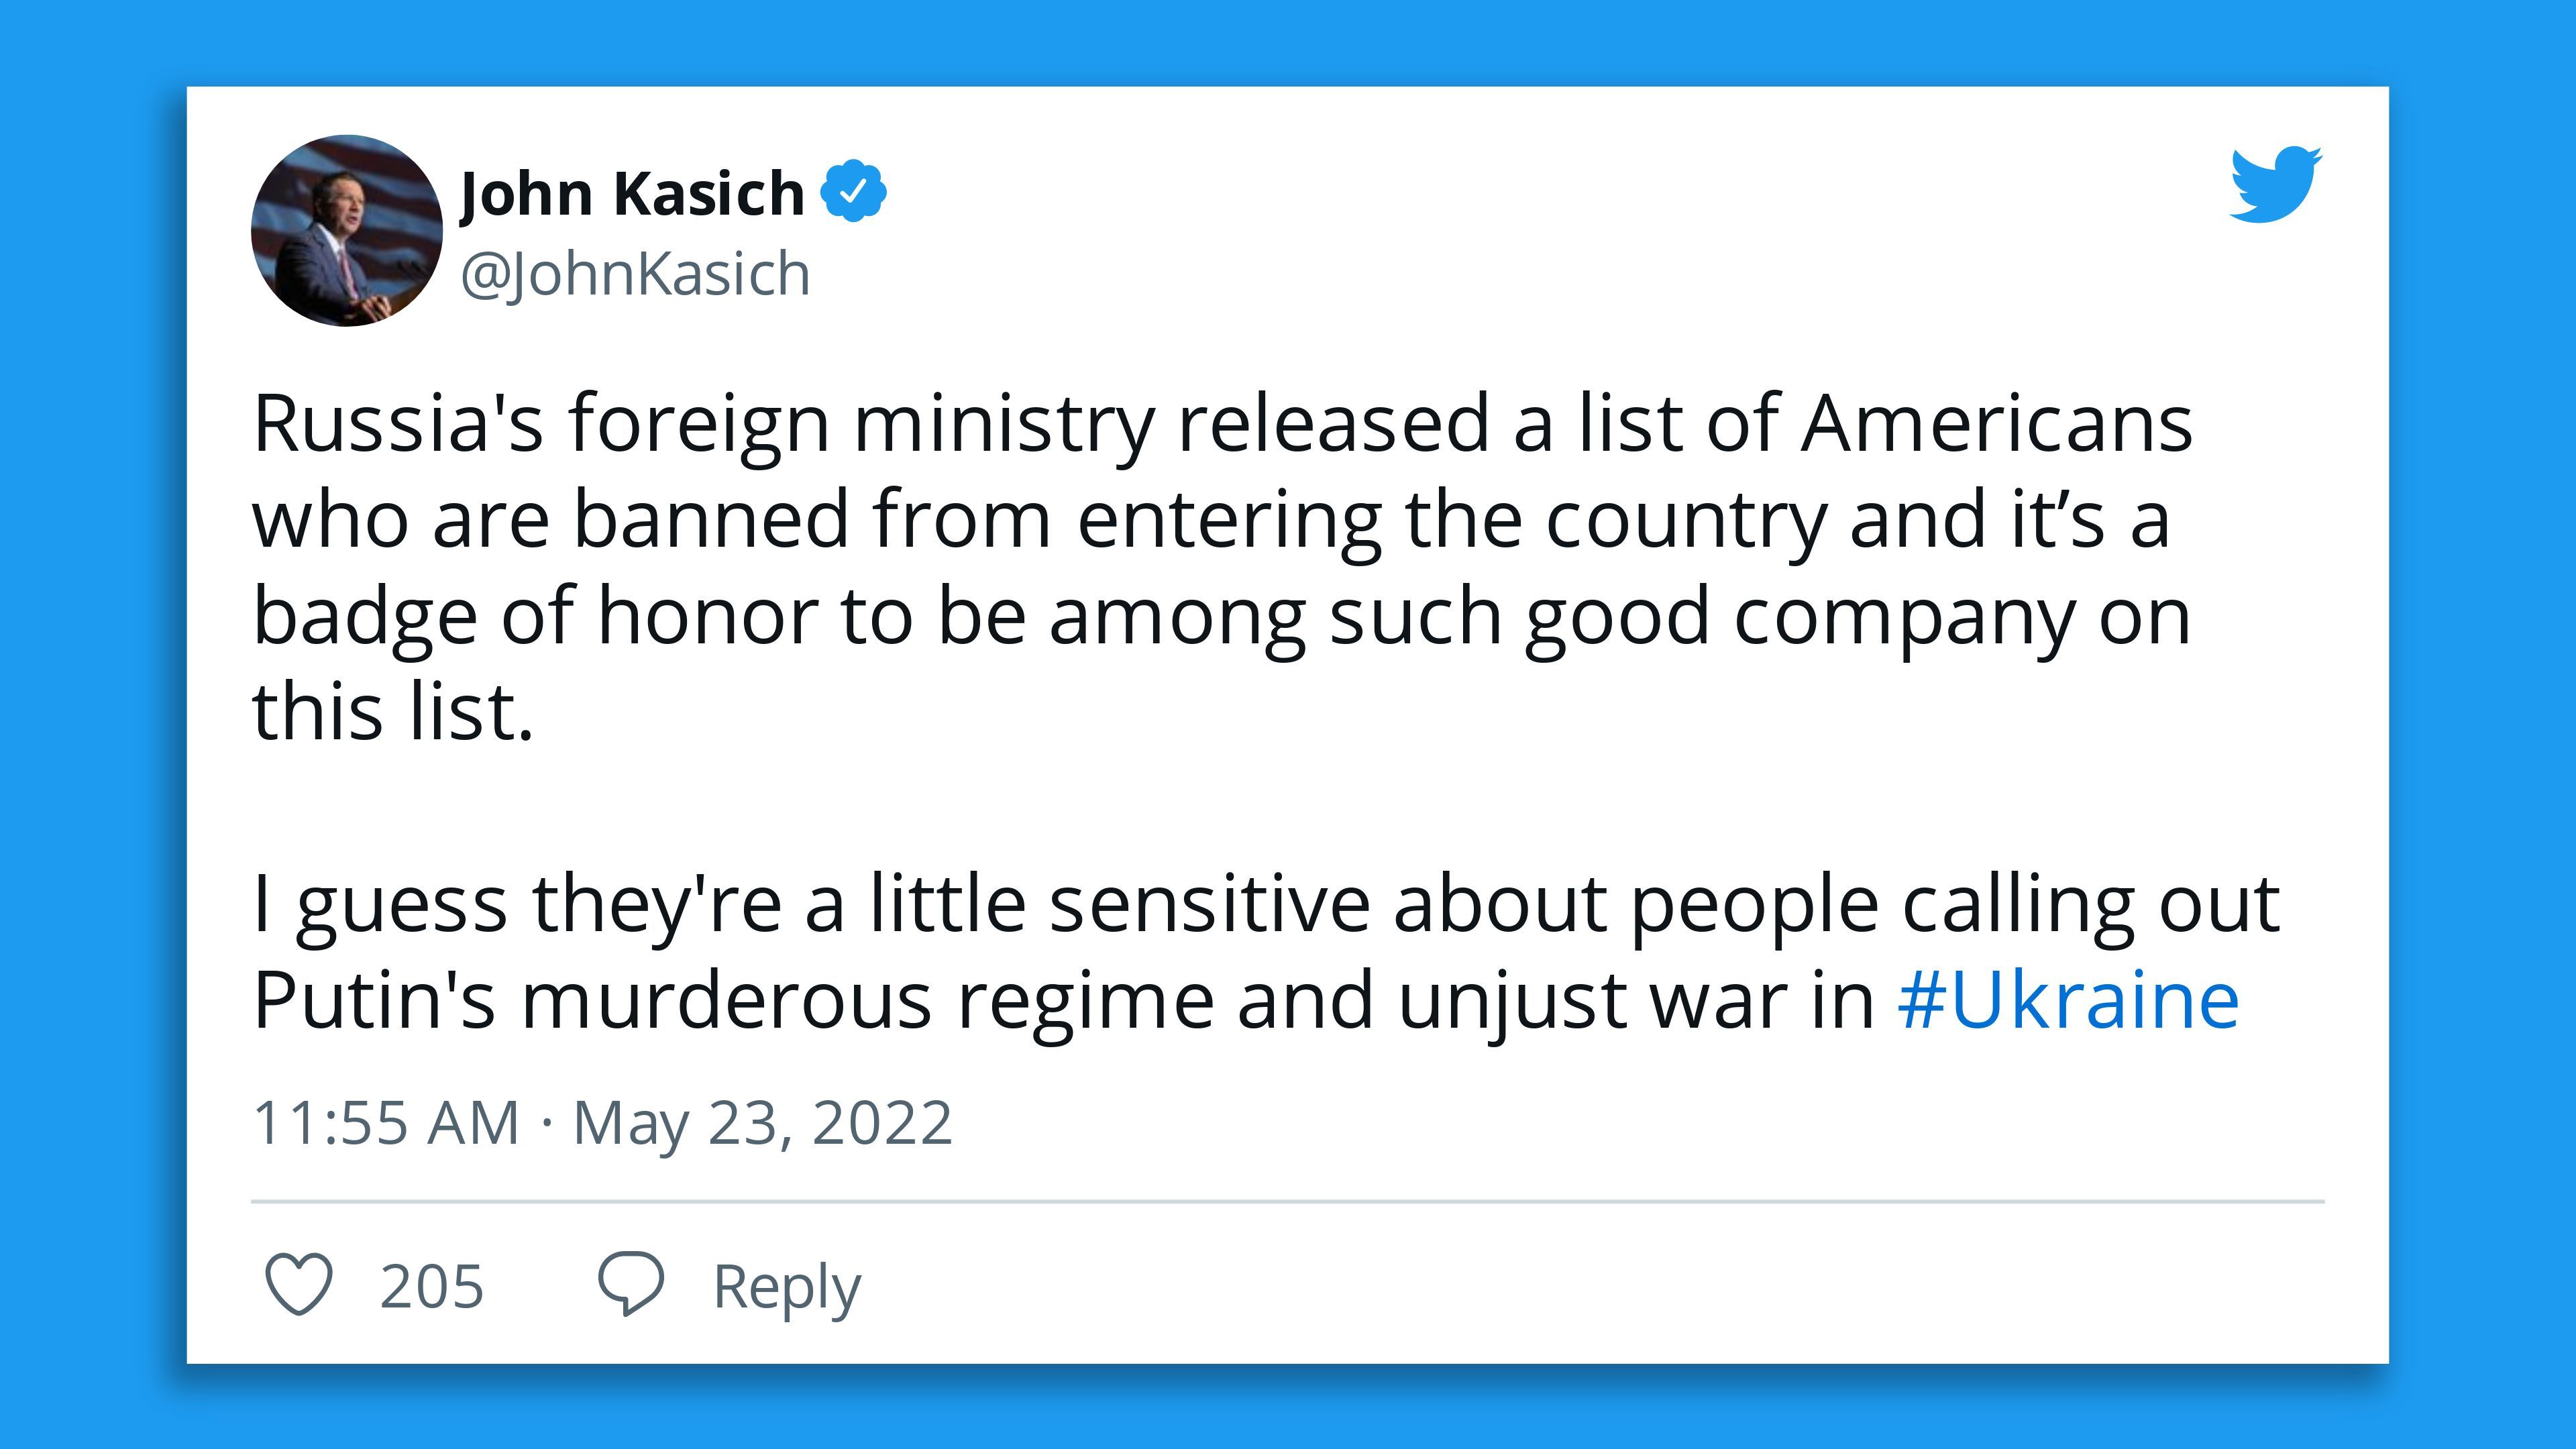 A John Kasich tweet: "Russia's foreign ministry released a list of Americans who are banned from entering the country and it’s a badge of honor to be among such good company on this list."